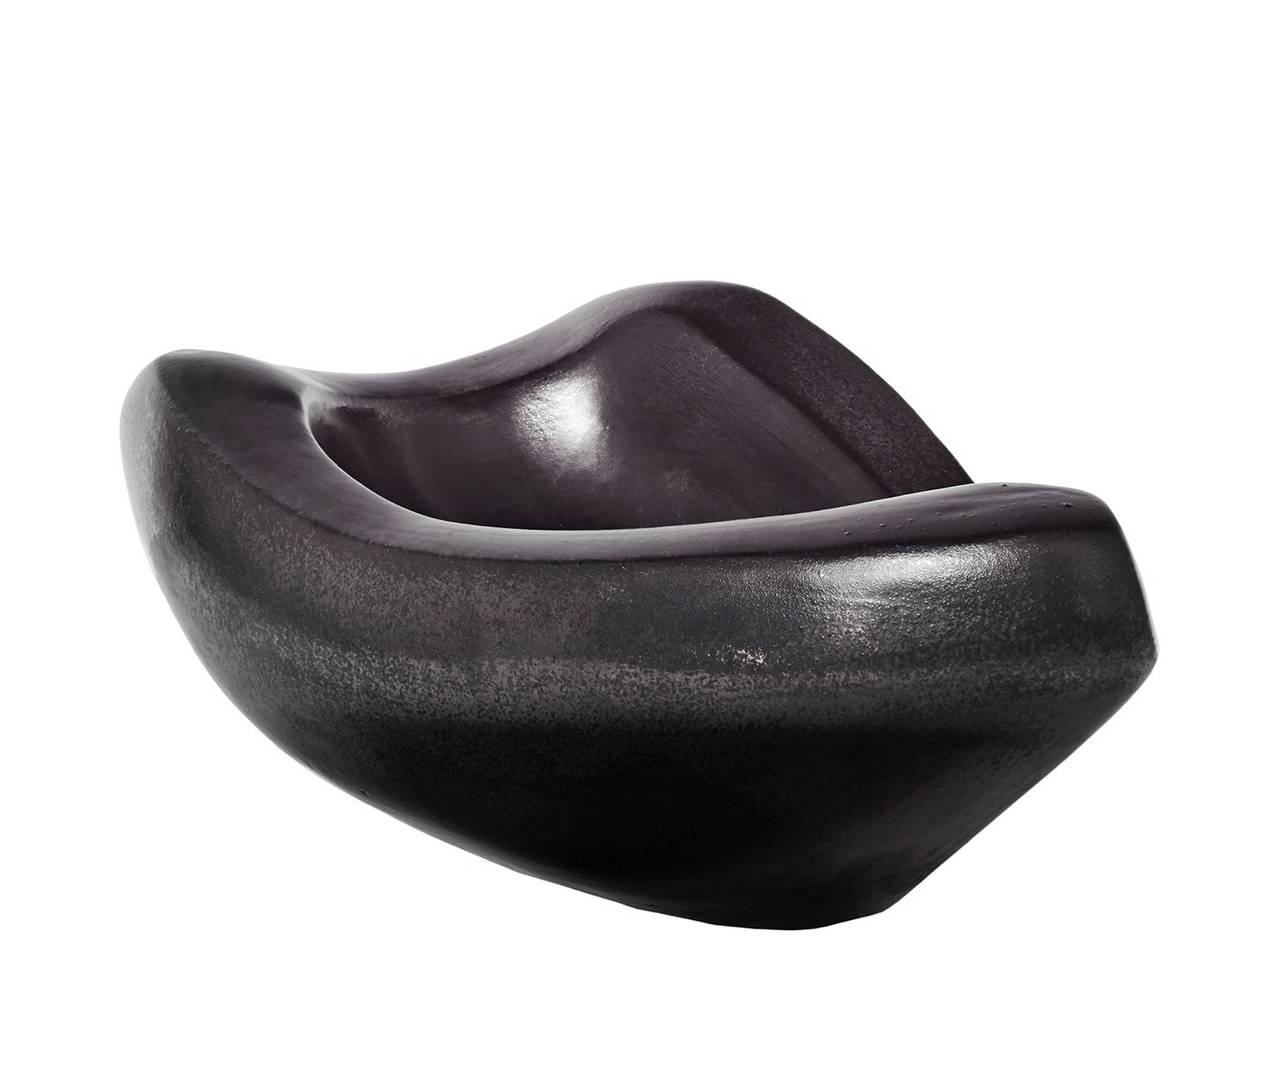 A beautiful forme libre bowl with contours so unpredictable that it appears to be a different piece with each new viewing angle. The perfect vessel to serve nuts or sweets in if you happen to live in an André Bloc 